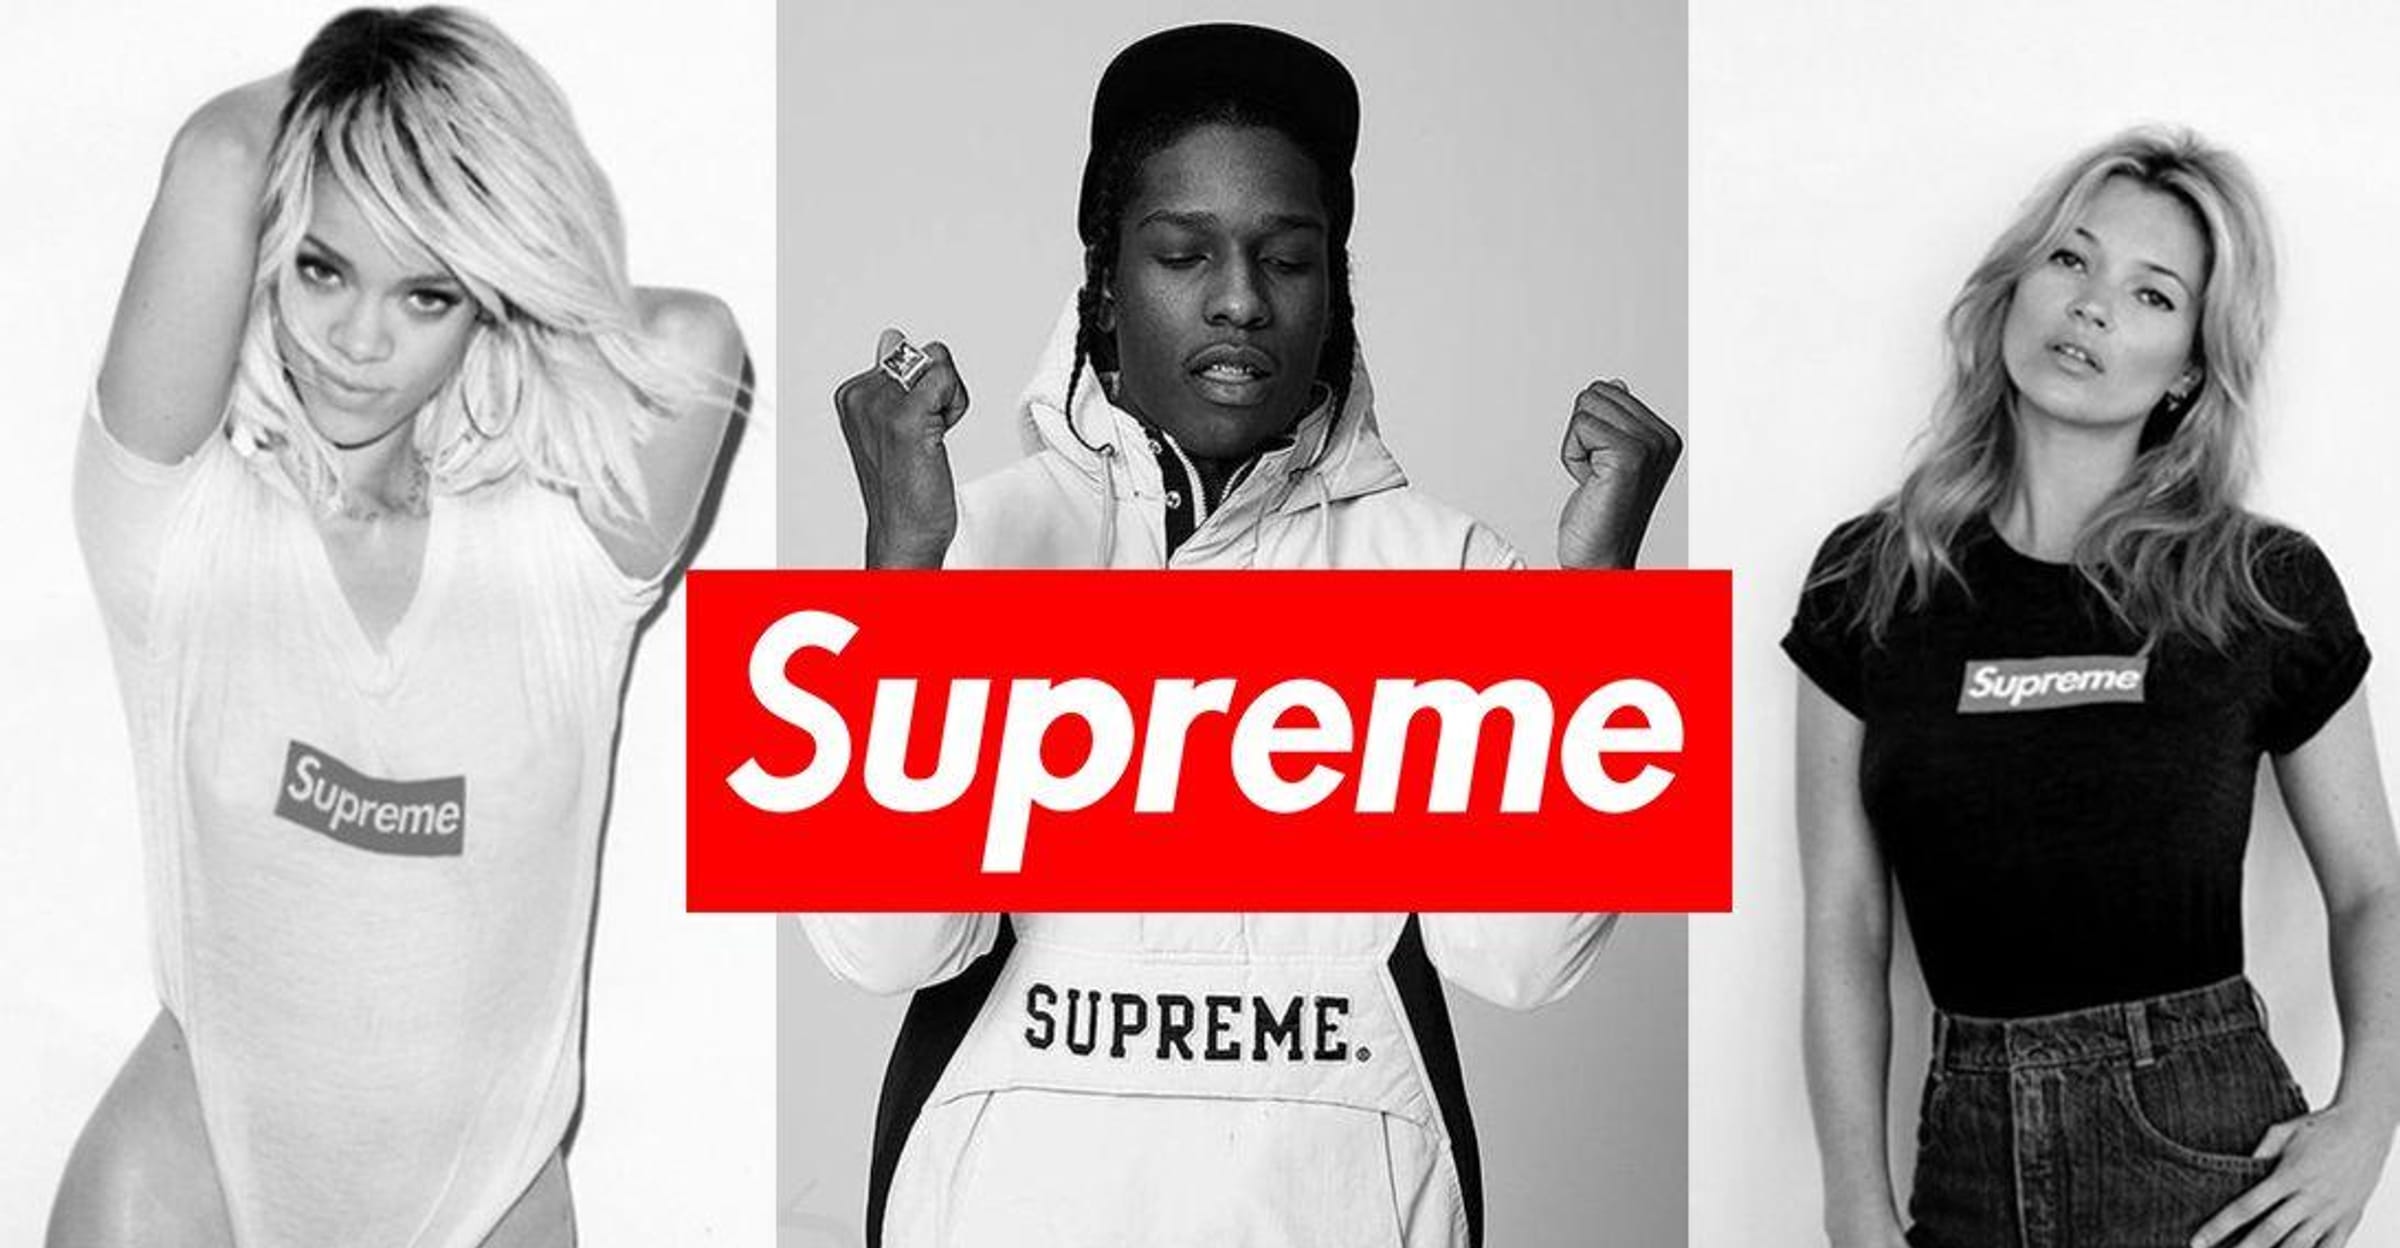 Why Is Supreme So Popular? 14 Things You Didn't Know About The Brand